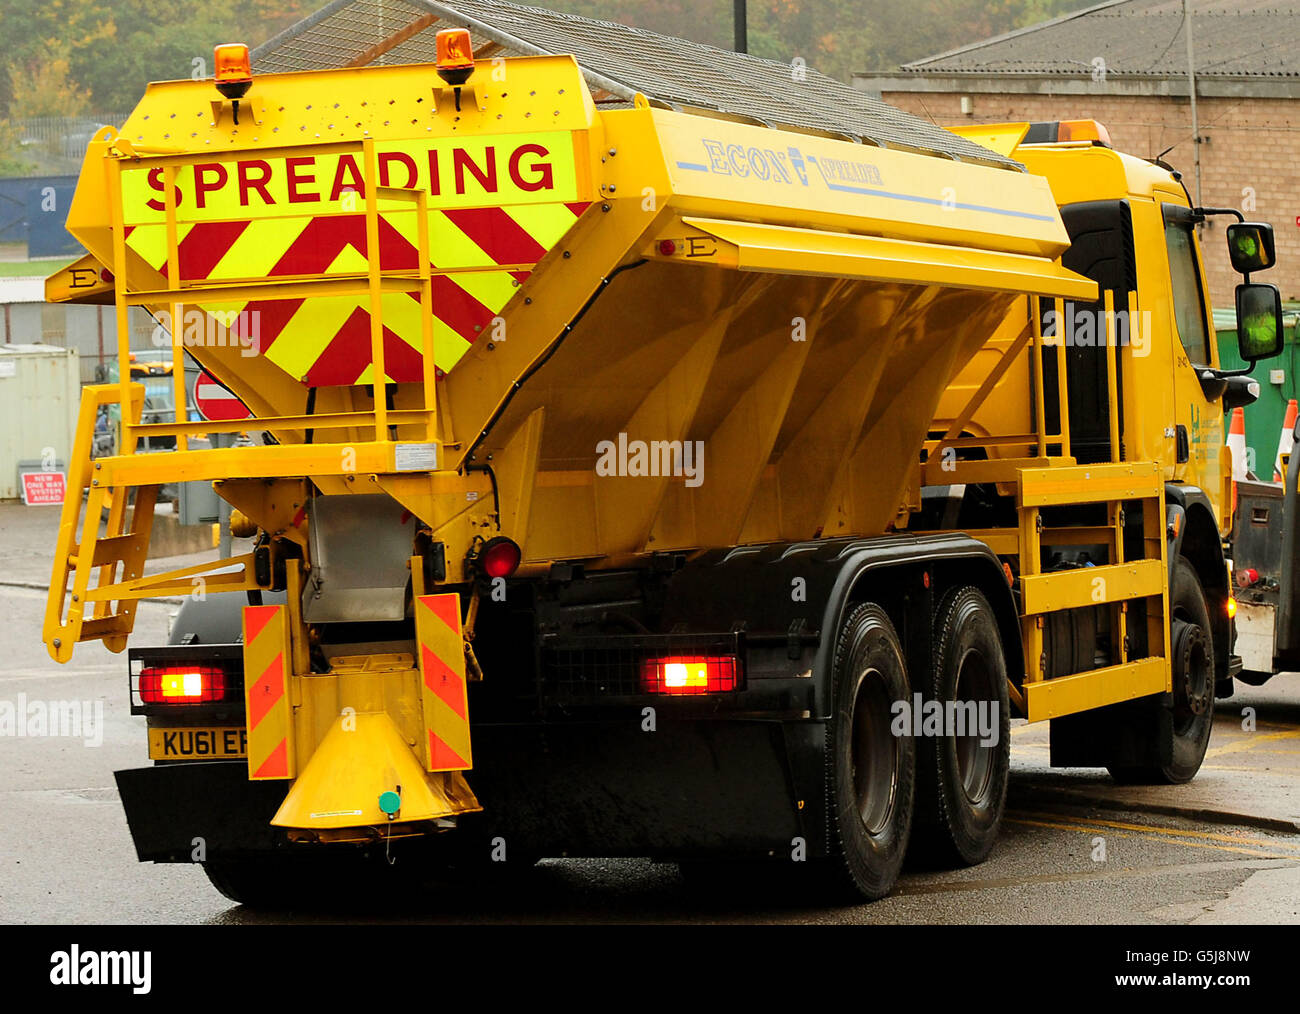 A gritting truck is loaded with a stockpile of salt and molasses mixture used for road gritting, in preparation for the winter season at the Northern Highway Depot, Mountsorrel, Leicestershire. Stock Photo